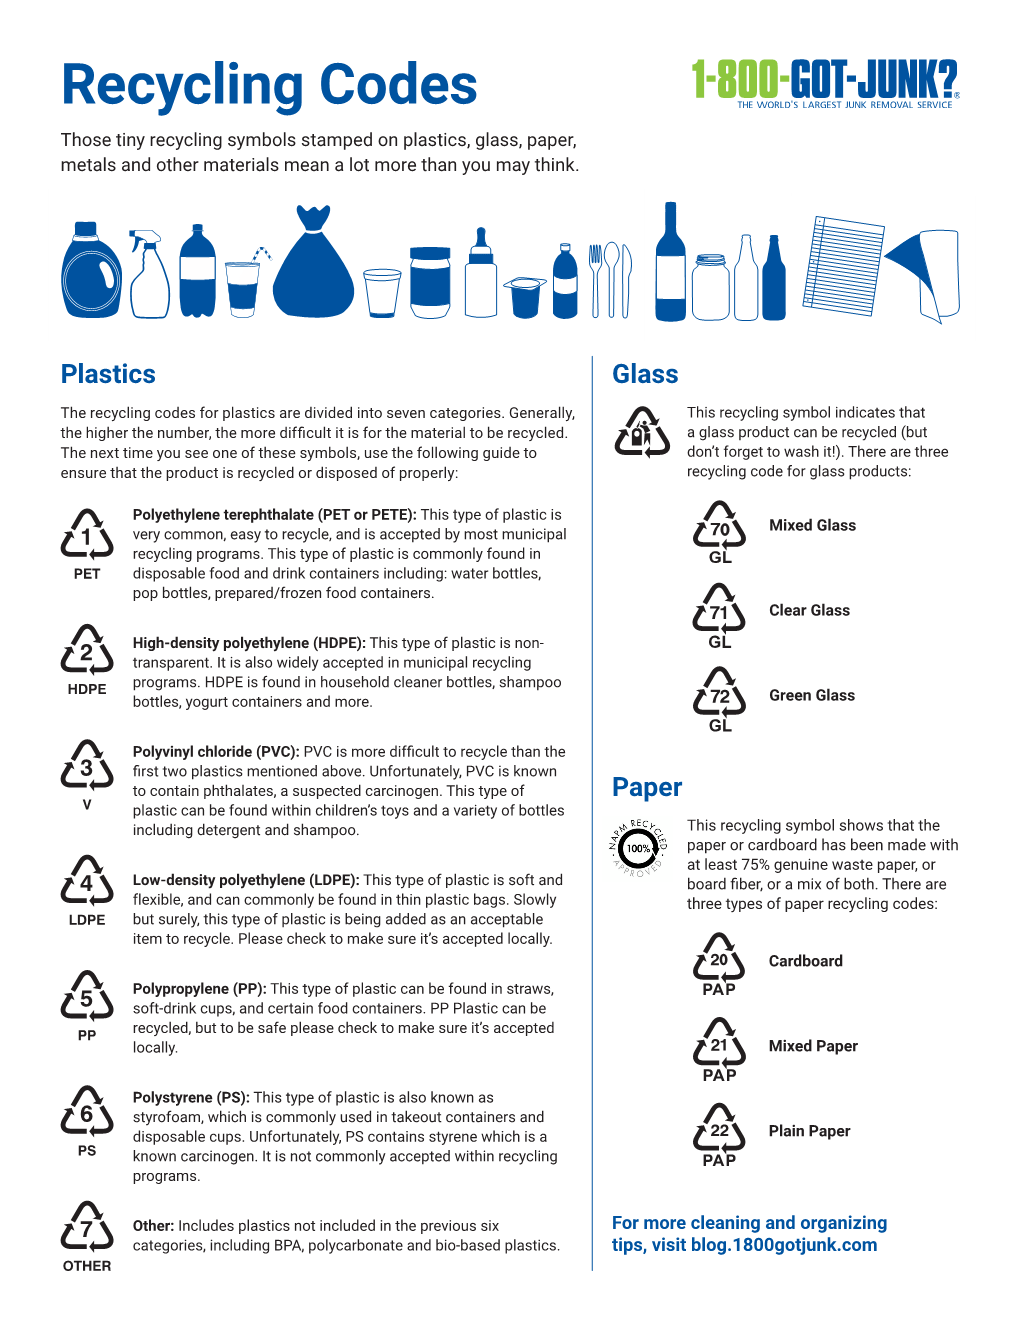 Recycling Codes Those Tiny Recycling Symbols Stamped on Plastics, Glass, Paper, Metals and Other Materials Mean a Lot More Than You May Think